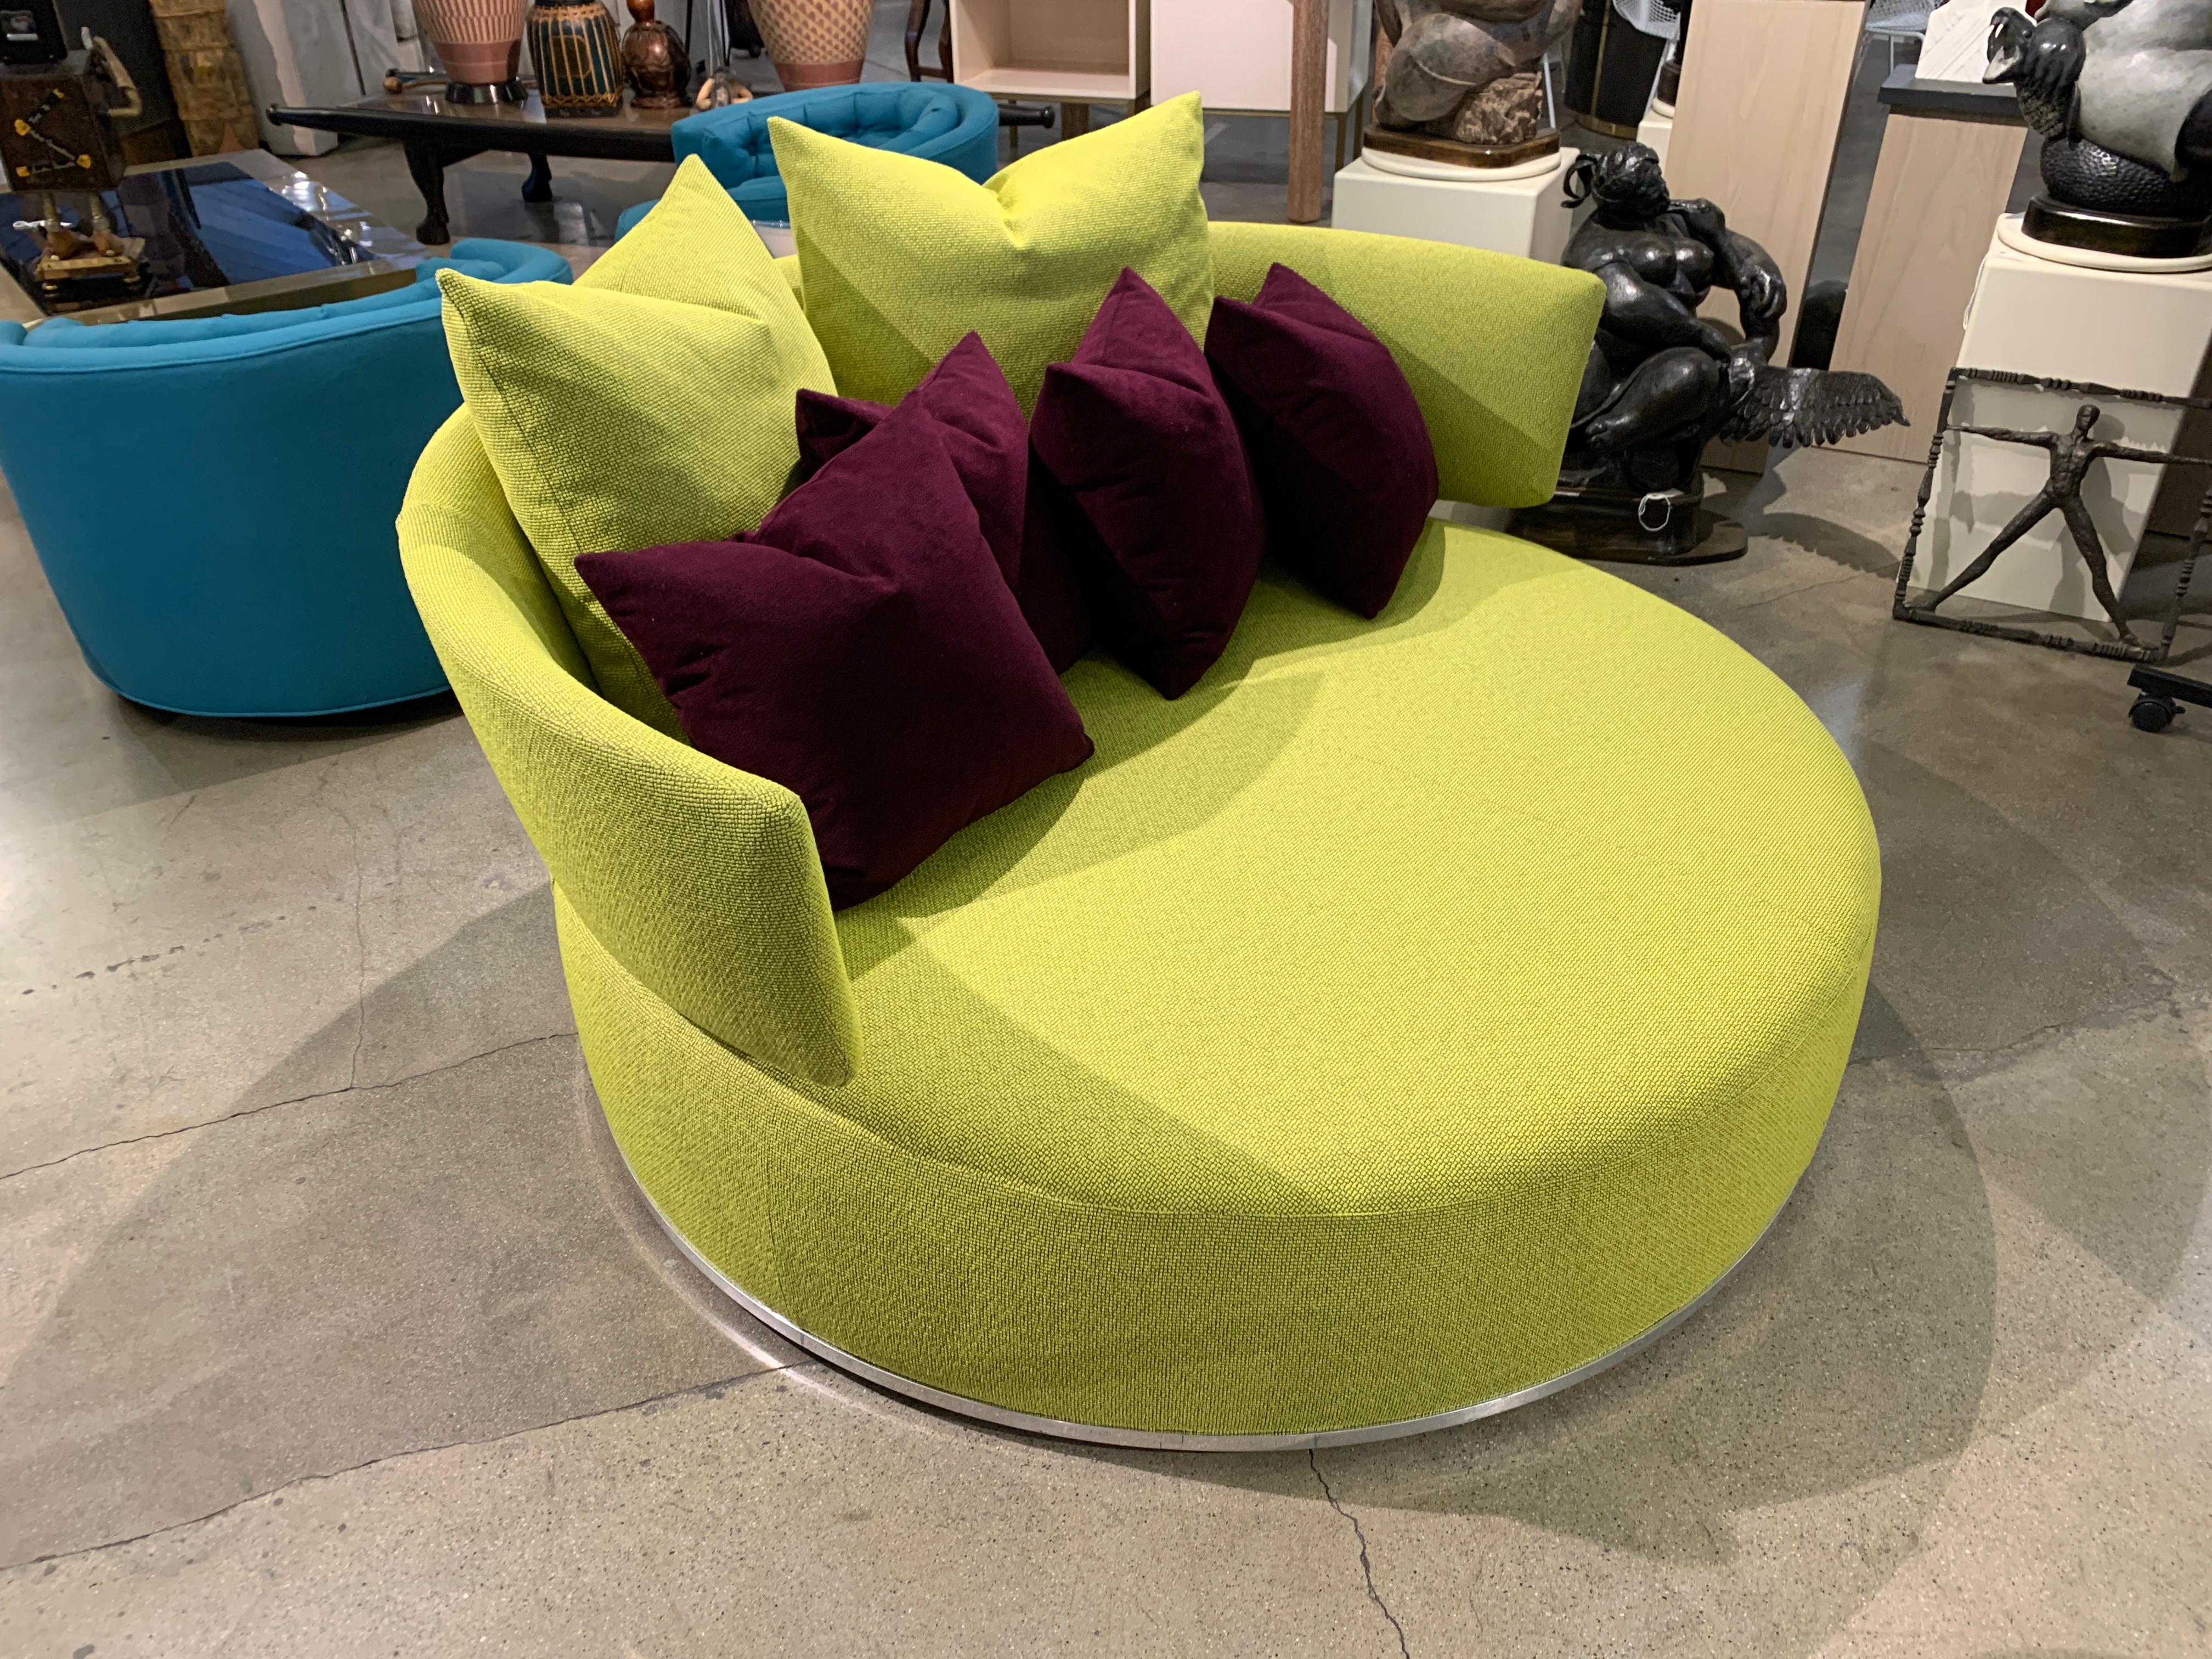 A beautifully re-upholstered B & B Italia round sofa designed by Antonio Citterio for their Maxalto line called the Amoenus. It has been redone in a citrus color fabric with purple accent pillows. The sofa swivels and rolls as it os on castors as